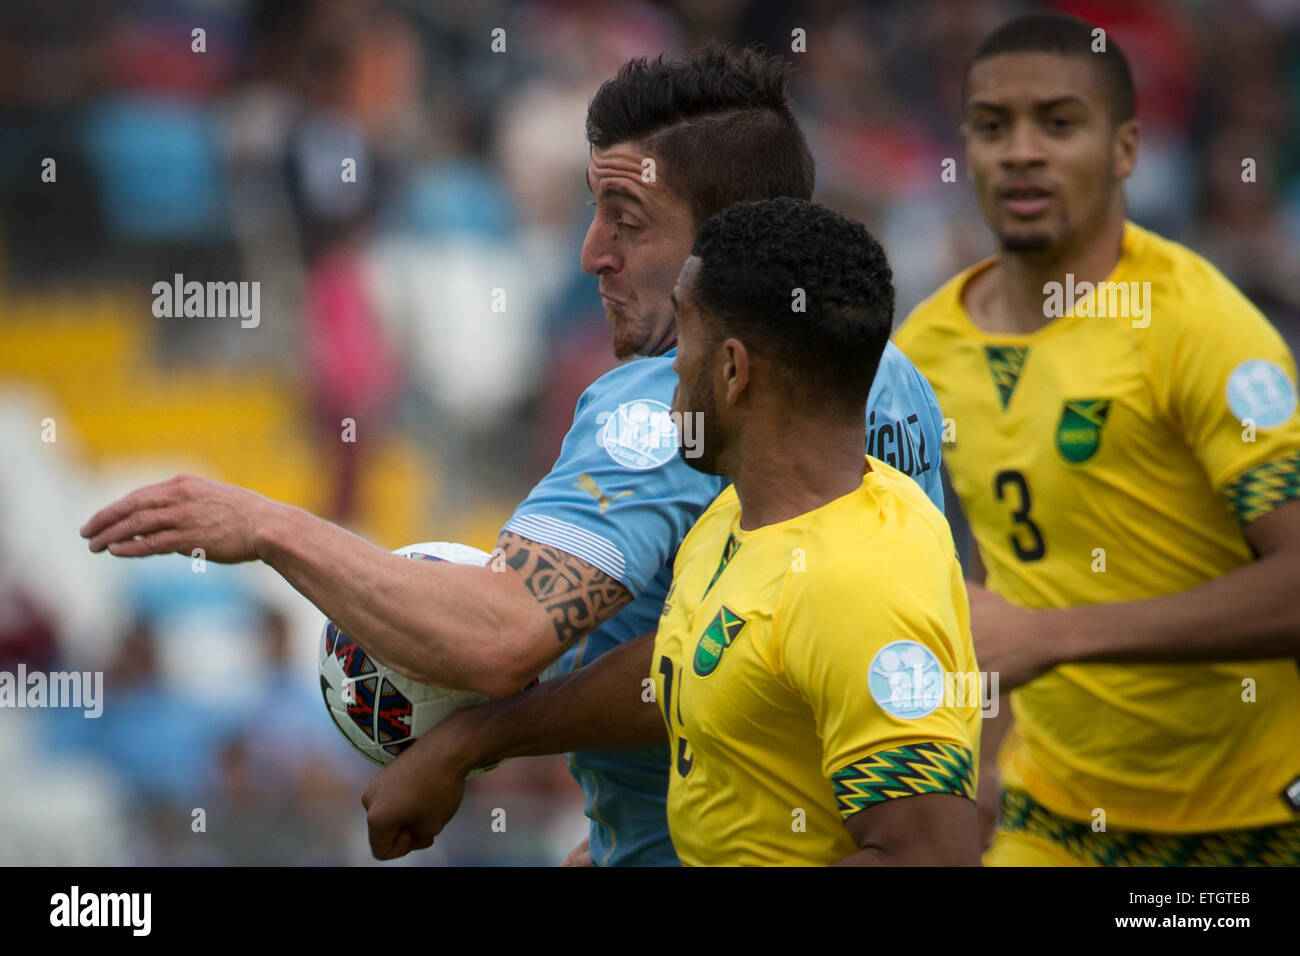 Antofagasta, Chile. 13th June, 2015. Cristian Rodriguez (L) of Uruguay vies with Cristian Rodriguez of Jamaica during a Group B match at Copa America 2015, in Antofagasta, Chile, on June 13, 2015. Uruguay won 1-0. © Pedro Mera/Xinhua/Alamy Live News Stock Photo